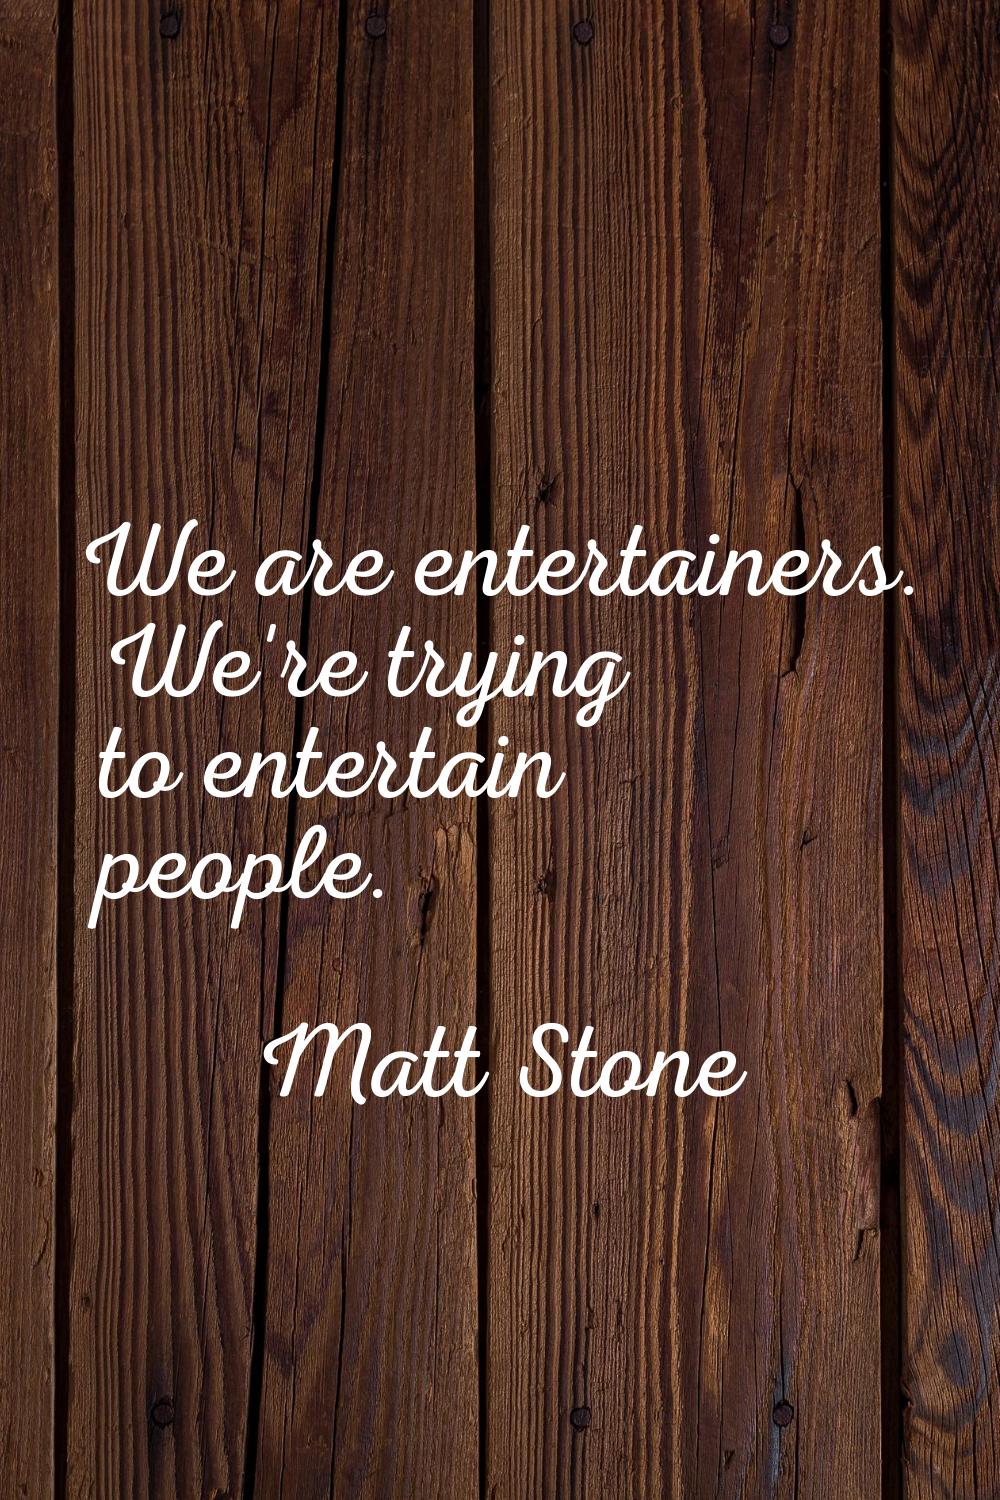 We are entertainers. We're trying to entertain people.